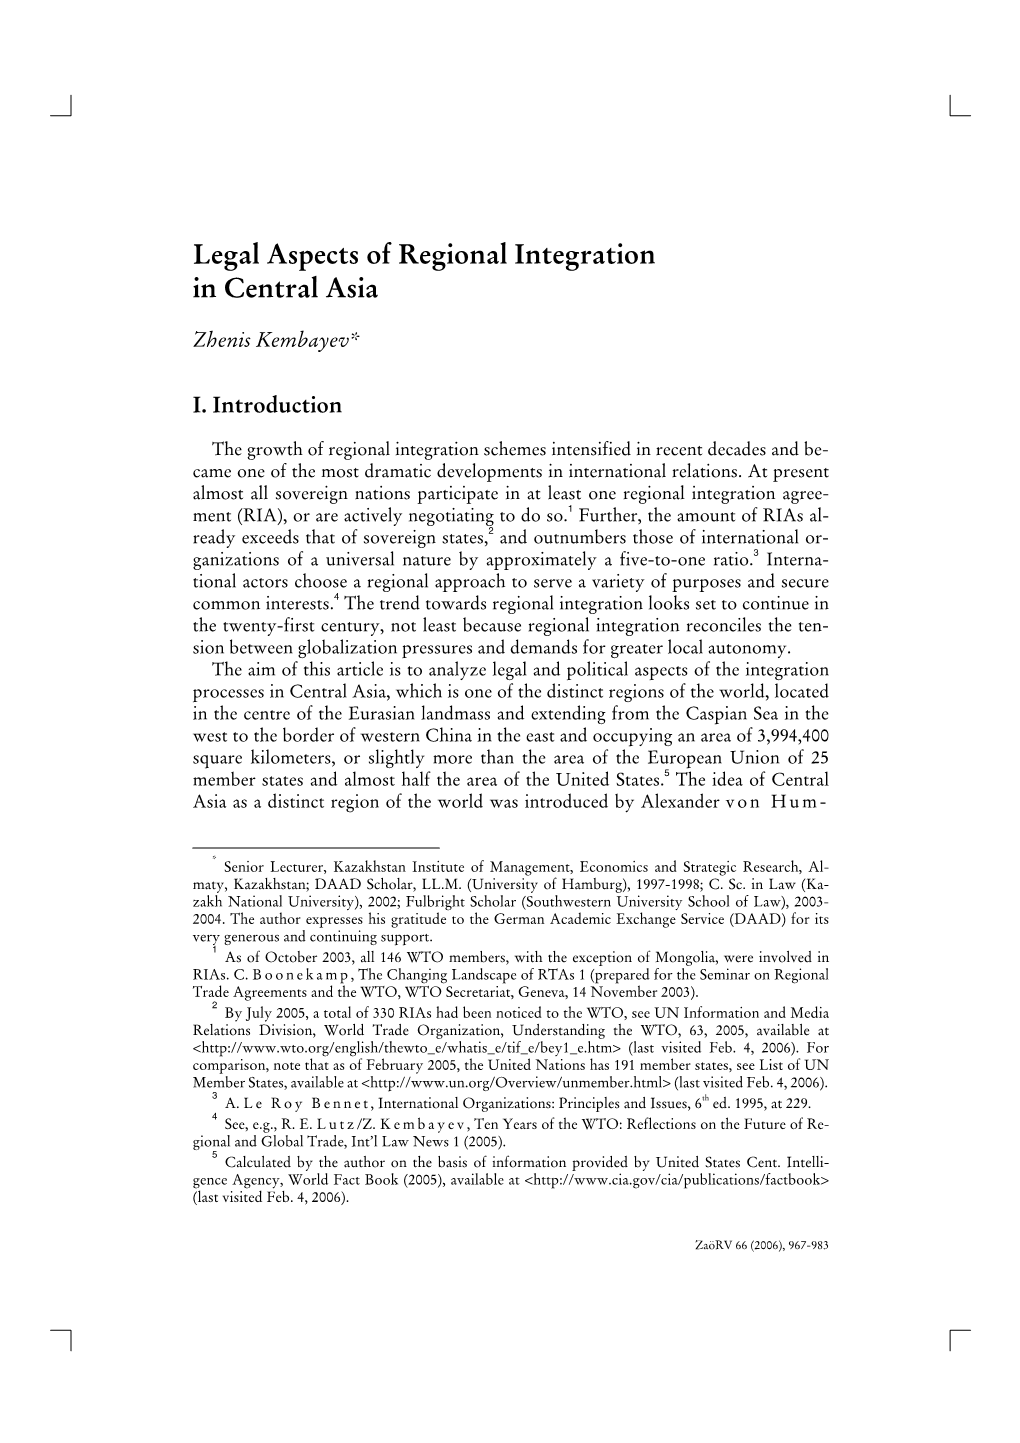 Legal Aspects of Regional Integration in Central Asia